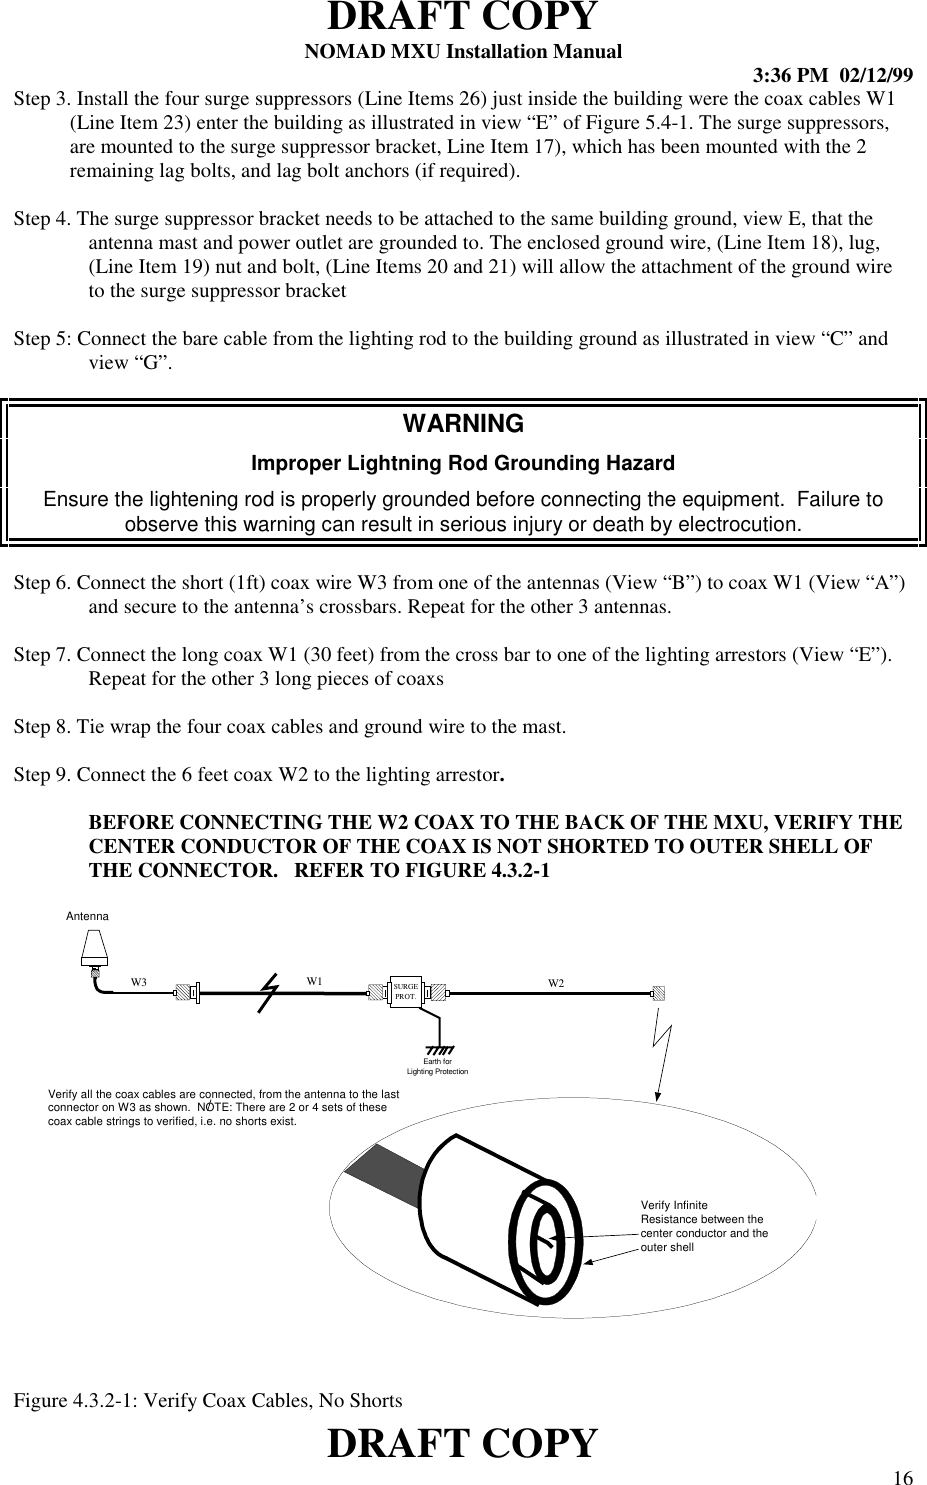 DRAFT COPYNOMAD MXU Installation Manual 3:36 PM  02/12/99DRAFT COPY 16Step 3. Install the four surge suppressors (Line Items 26) just inside the building were the coax cables W1(Line Item 23) enter the building as illustrated in view “E” of Figure 5.4-1. The surge suppressors,are mounted to the surge suppressor bracket, Line Item 17), which has been mounted with the 2remaining lag bolts, and lag bolt anchors (if required).Step 4. The surge suppressor bracket needs to be attached to the same building ground, view E, that theantenna mast and power outlet are grounded to. The enclosed ground wire, (Line Item 18), lug,(Line Item 19) nut and bolt, (Line Items 20 and 21) will allow the attachment of the ground wireto the surge suppressor bracketStep 5: Connect the bare cable from the lighting rod to the building ground as illustrated in view “C” andview “G”.WARNINGImproper Lightning Rod Grounding HazardEnsure the lightening rod is properly grounded before connecting the equipment.  Failure toobserve this warning can result in serious injury or death by electrocution.Step 6. Connect the short (1ft) coax wire W3 from one of the antennas (View “B”) to coax W1 (View “A”)and secure to the antenna’s crossbars. Repeat for the other 3 antennas.Step 7. Connect the long coax W1 (30 feet) from the cross bar to one of the lighting arrestors (View “E”).Repeat for the other 3 long pieces of coaxsStep 8. Tie wrap the four coax cables and ground wire to the mast.Step 9. Connect the 6 feet coax W2 to the lighting arrestor.BEFORE CONNECTING THE W2 COAX TO THE BACK OF THE MXU, VERIFY THECENTER CONDUCTOR OF THE COAX IS NOT SHORTED TO OUTER SHELL OFTHE CONNECTOR.   REFER TO FIGURE 4.3.2-1Figure 4.3.2-1: Verify Coax Cables, No ShortsSURGEPROT.W3Earth forLighting ProtectionW2Verify InfiniteResistance between thecenter conductor and theouter shellVerify all the coax cables are connected, from the antenna to the lastconnector on W3 as shown.  NOTE: There are 2 or 4 sets of thesecoax cable strings to verified, i.e. no shorts exist.W1Antenna